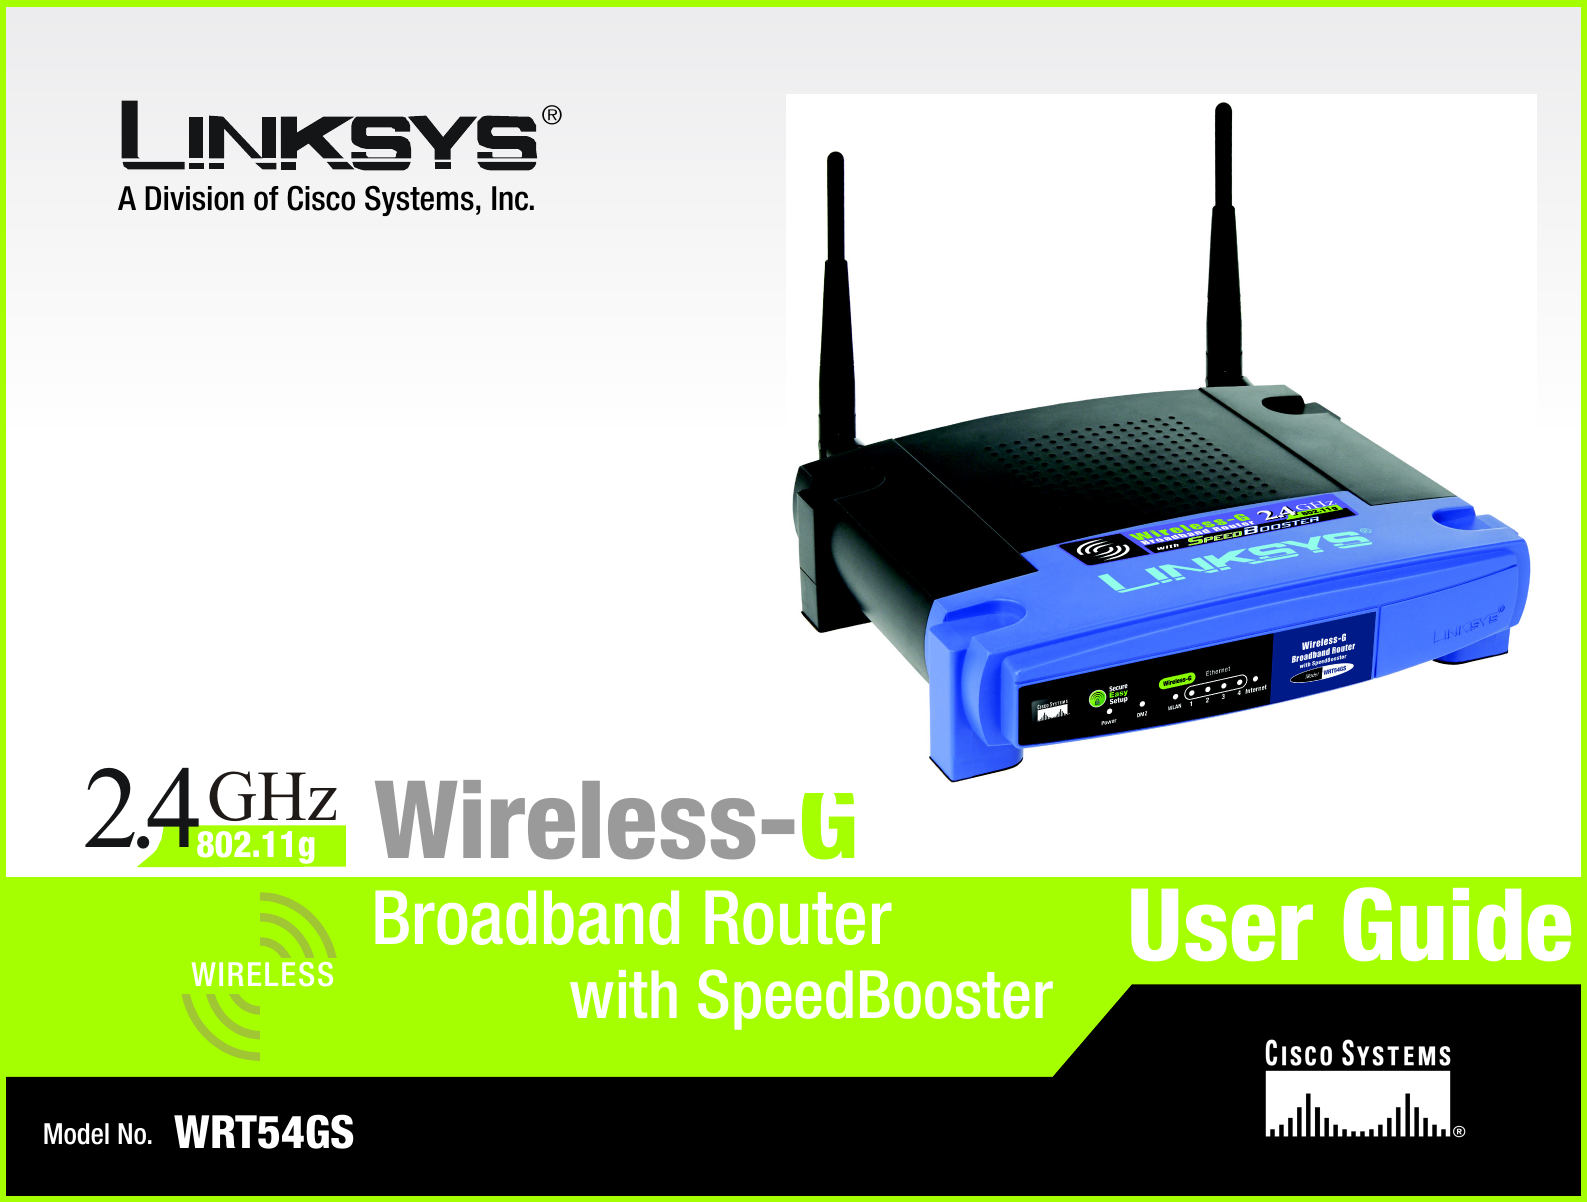 A Division of Cisco Systems, Inc.®Model No.Broadband RouterWireless-GWRT54GSUser GuideWIRELESSGHz2.4802.11gwith SpeedBooster